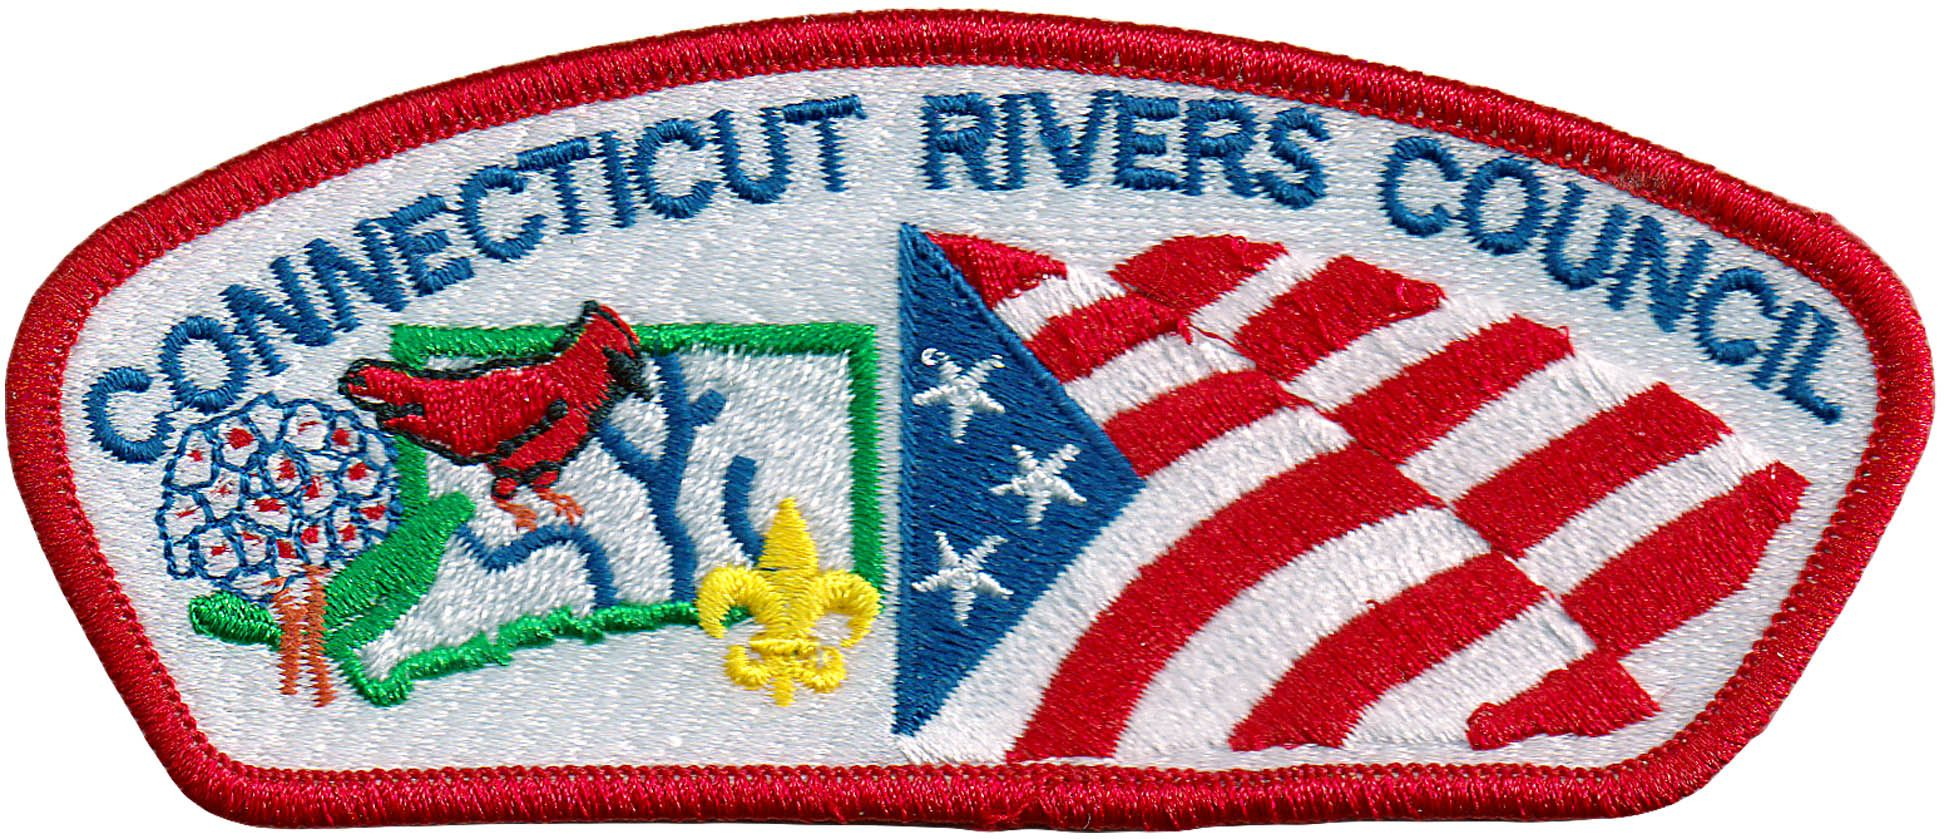 Public BADGES AND AWARDS - Cub Scout Pack 0682 (Sioux Falls, South